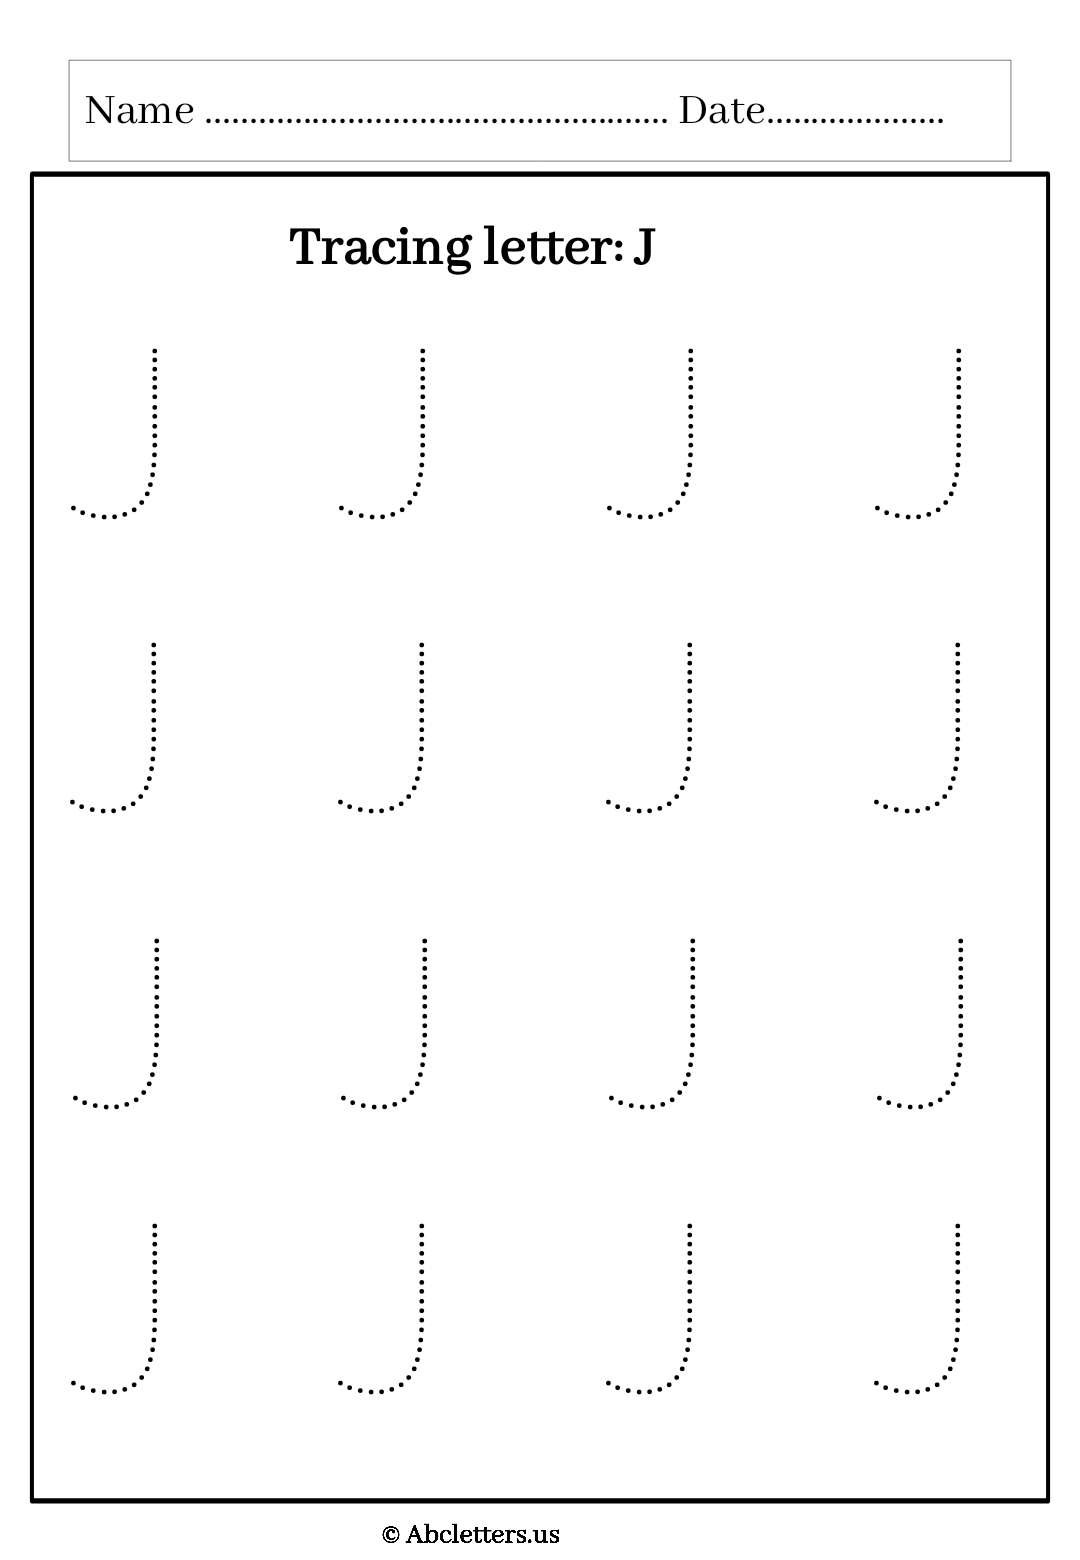 Tracing letter J uppercase